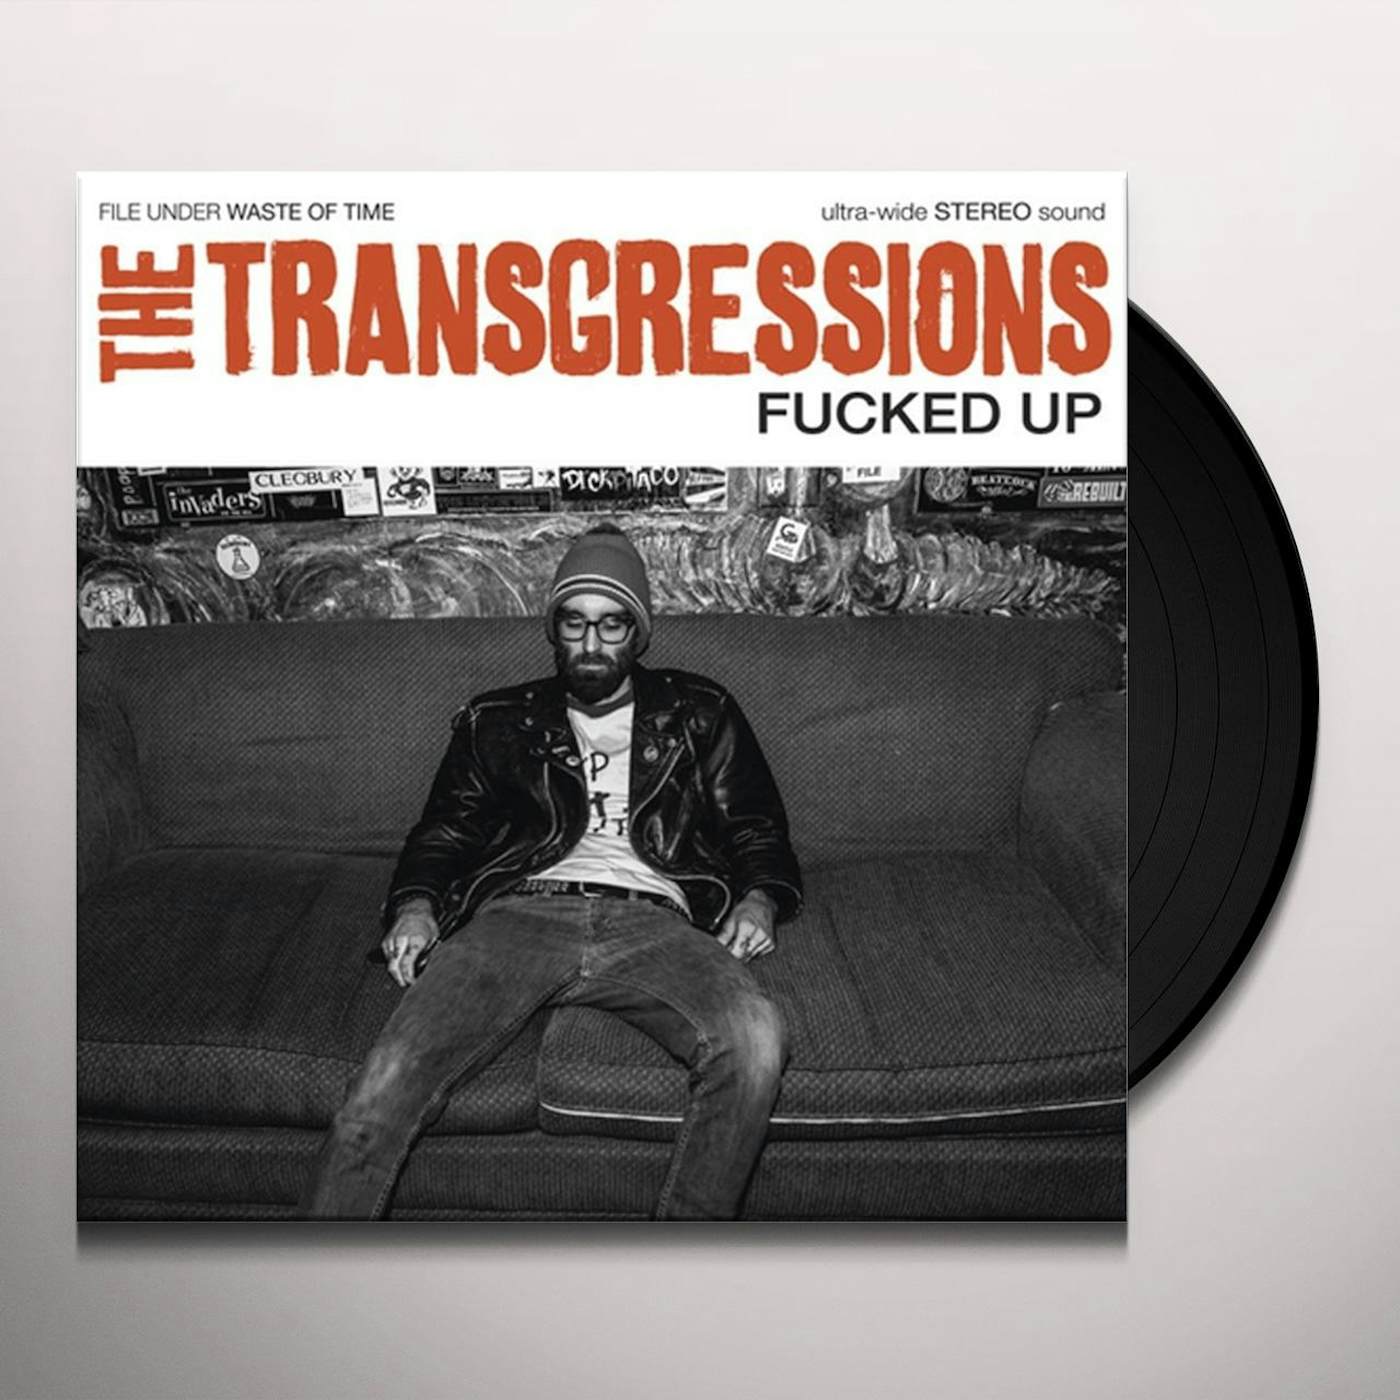 The Transgressions Fucked Up Vinyl Record